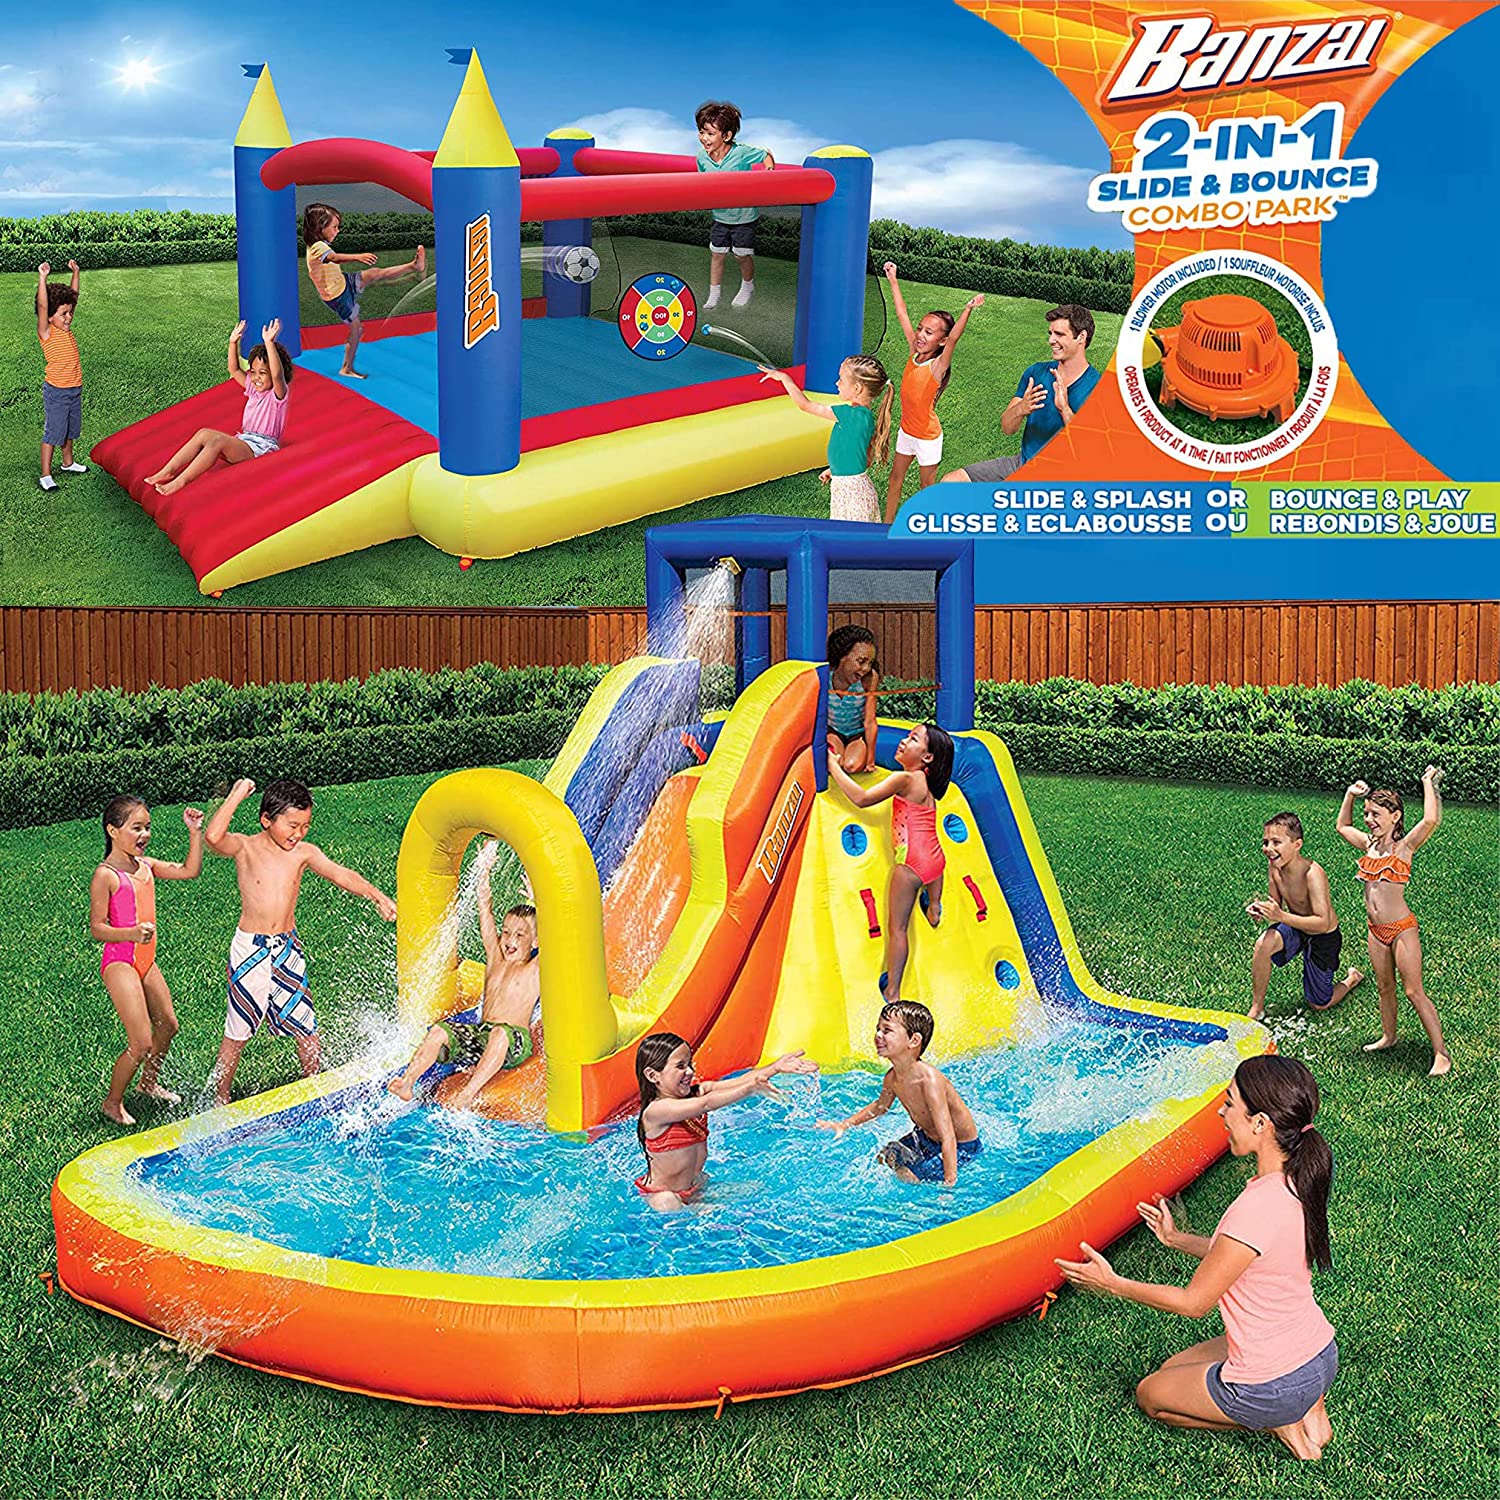 BANZAI Inflatable Water Slide & Bounce House (Combo Pack) - Huge Heavy Duty Outdoor Kids Adventure Park Pool with Sprinkler Wave and Slide Plus Large Bonus 12’x9 Bounce House - Free Blower Included - image 1 of 5